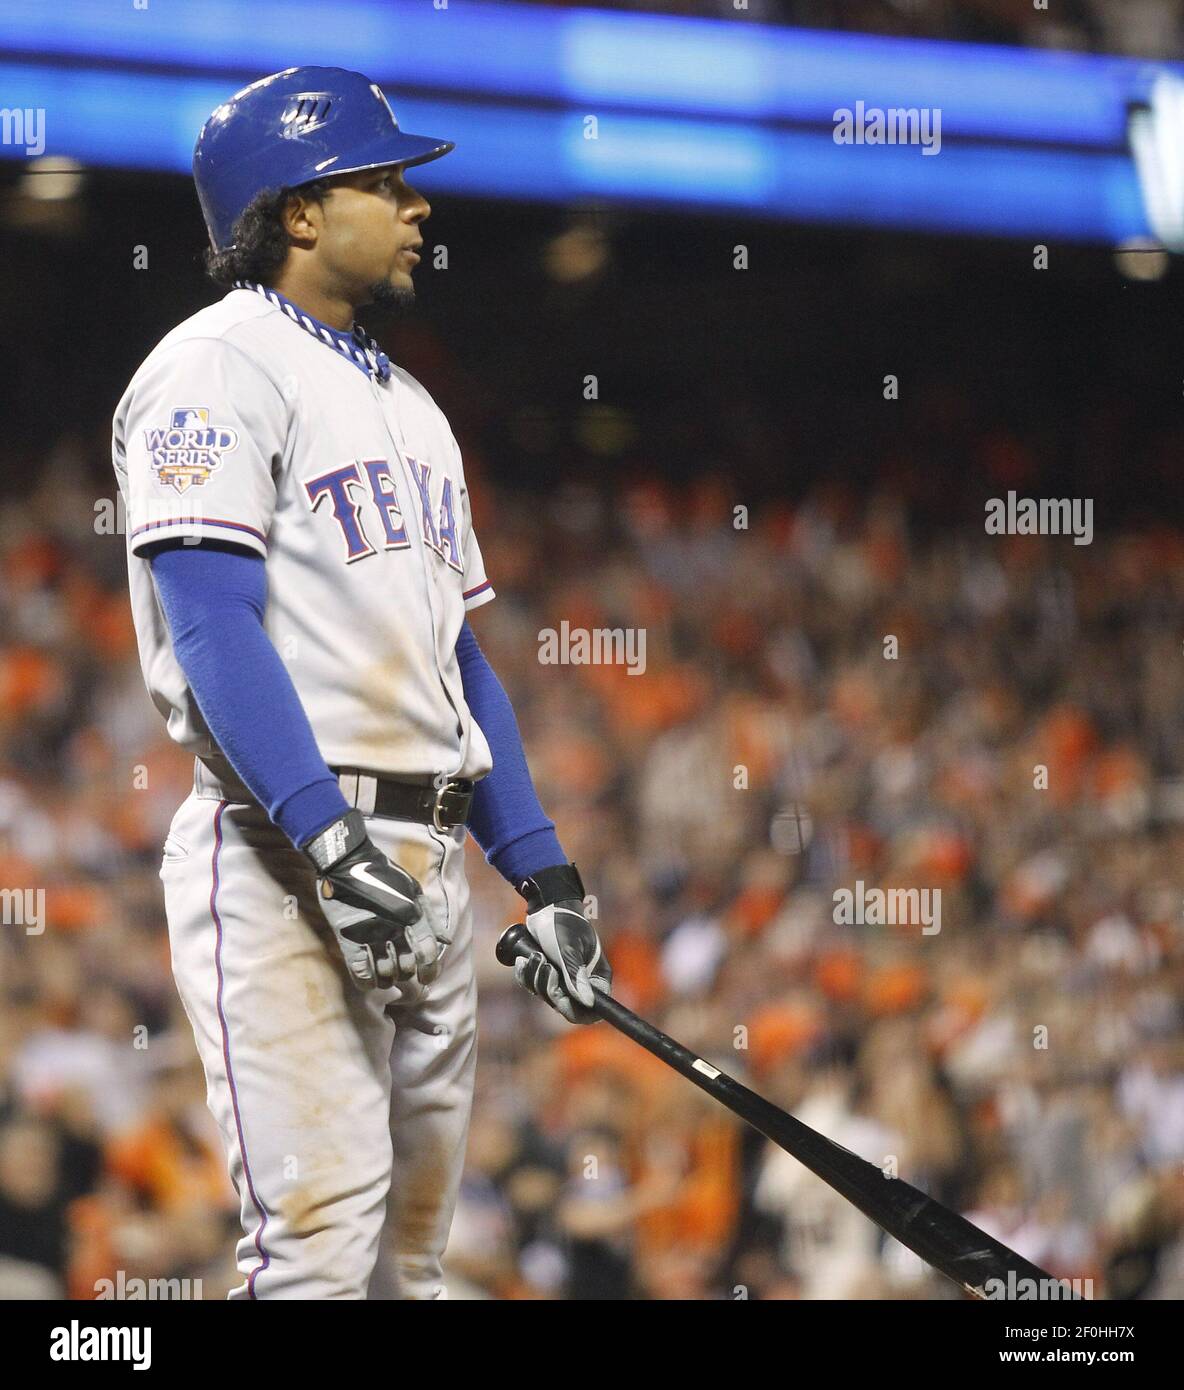 Elvis Andrus of the Texas Rangers strikes out in the 6th inning